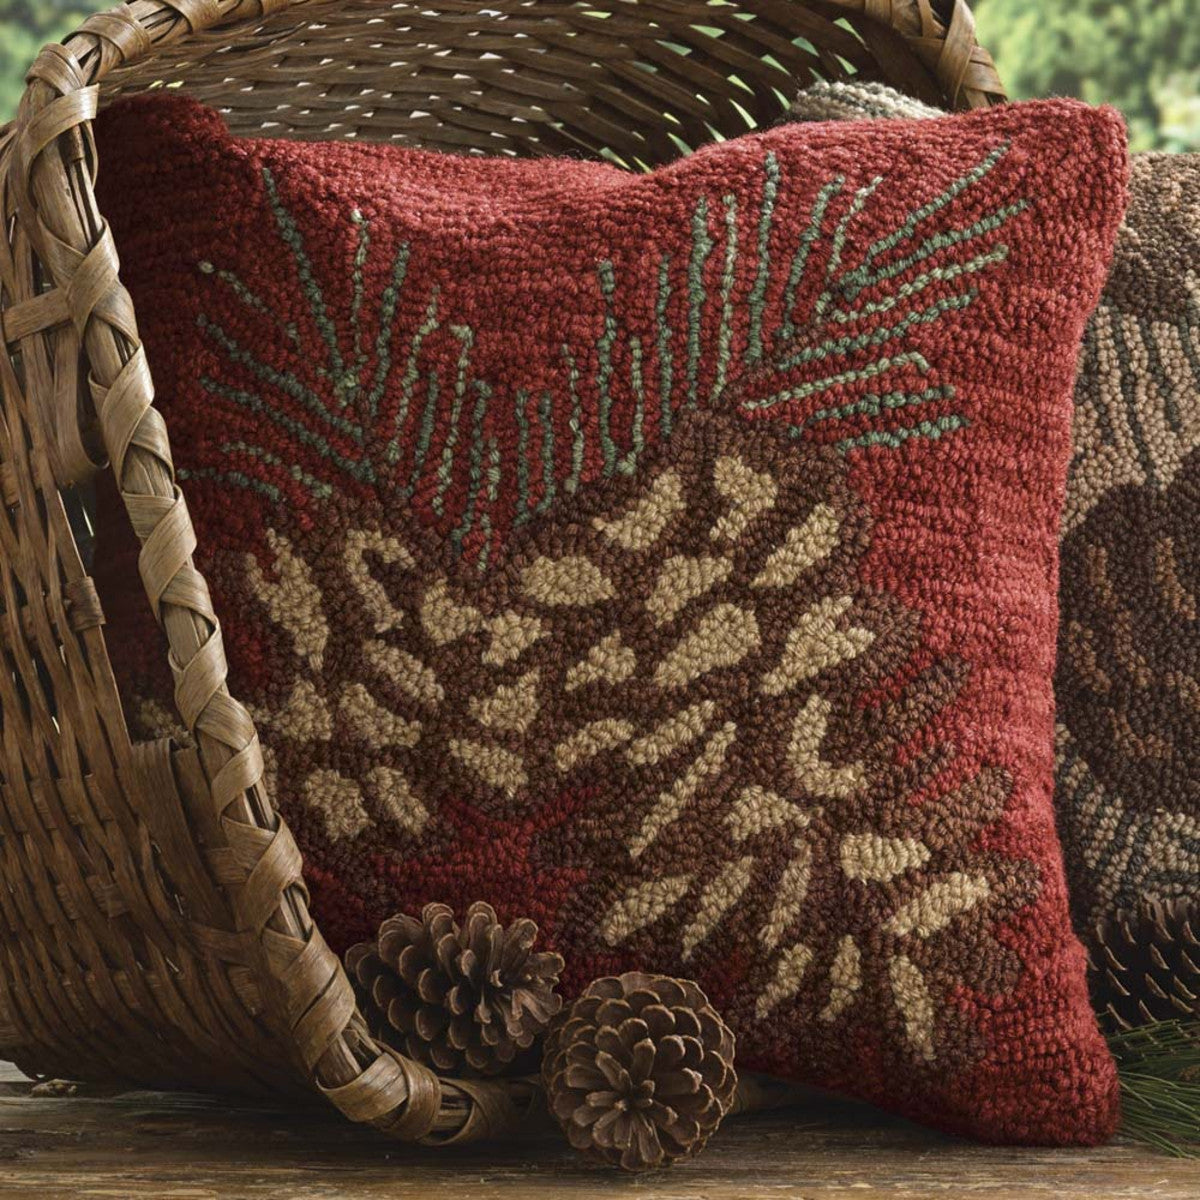 Pinecone Hooked Pillow Down Feather Fill 18"x18" - Park Designs